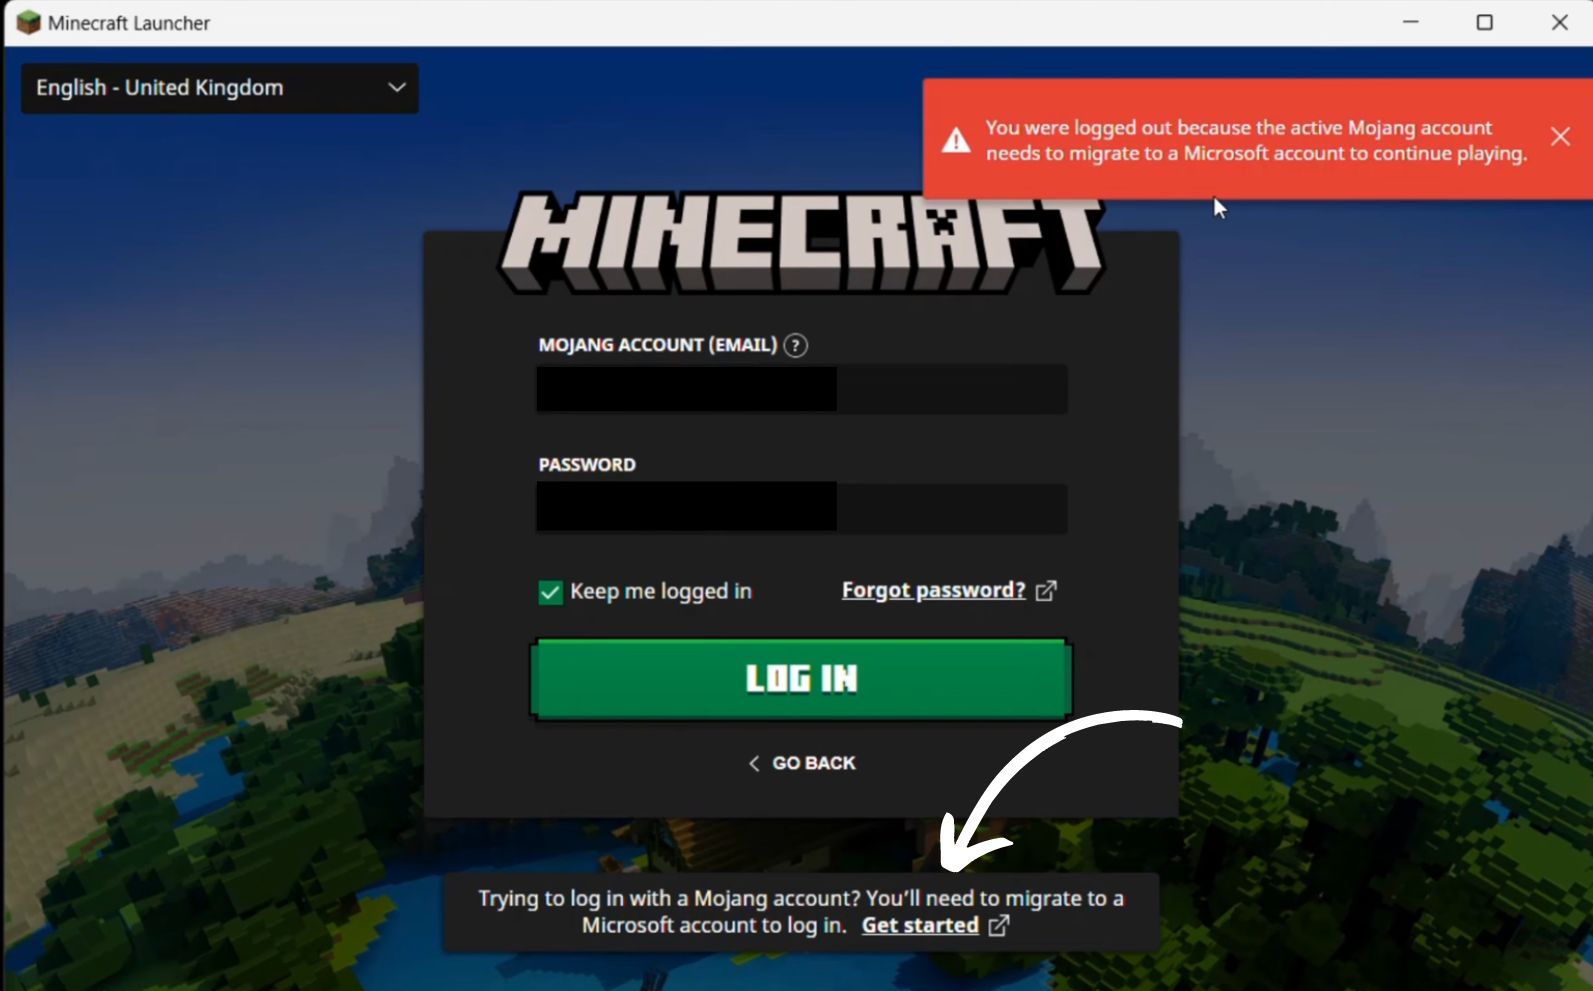 Minecraft Launcher Mojang Account Warning on Log In Screen Get Started to Migrate